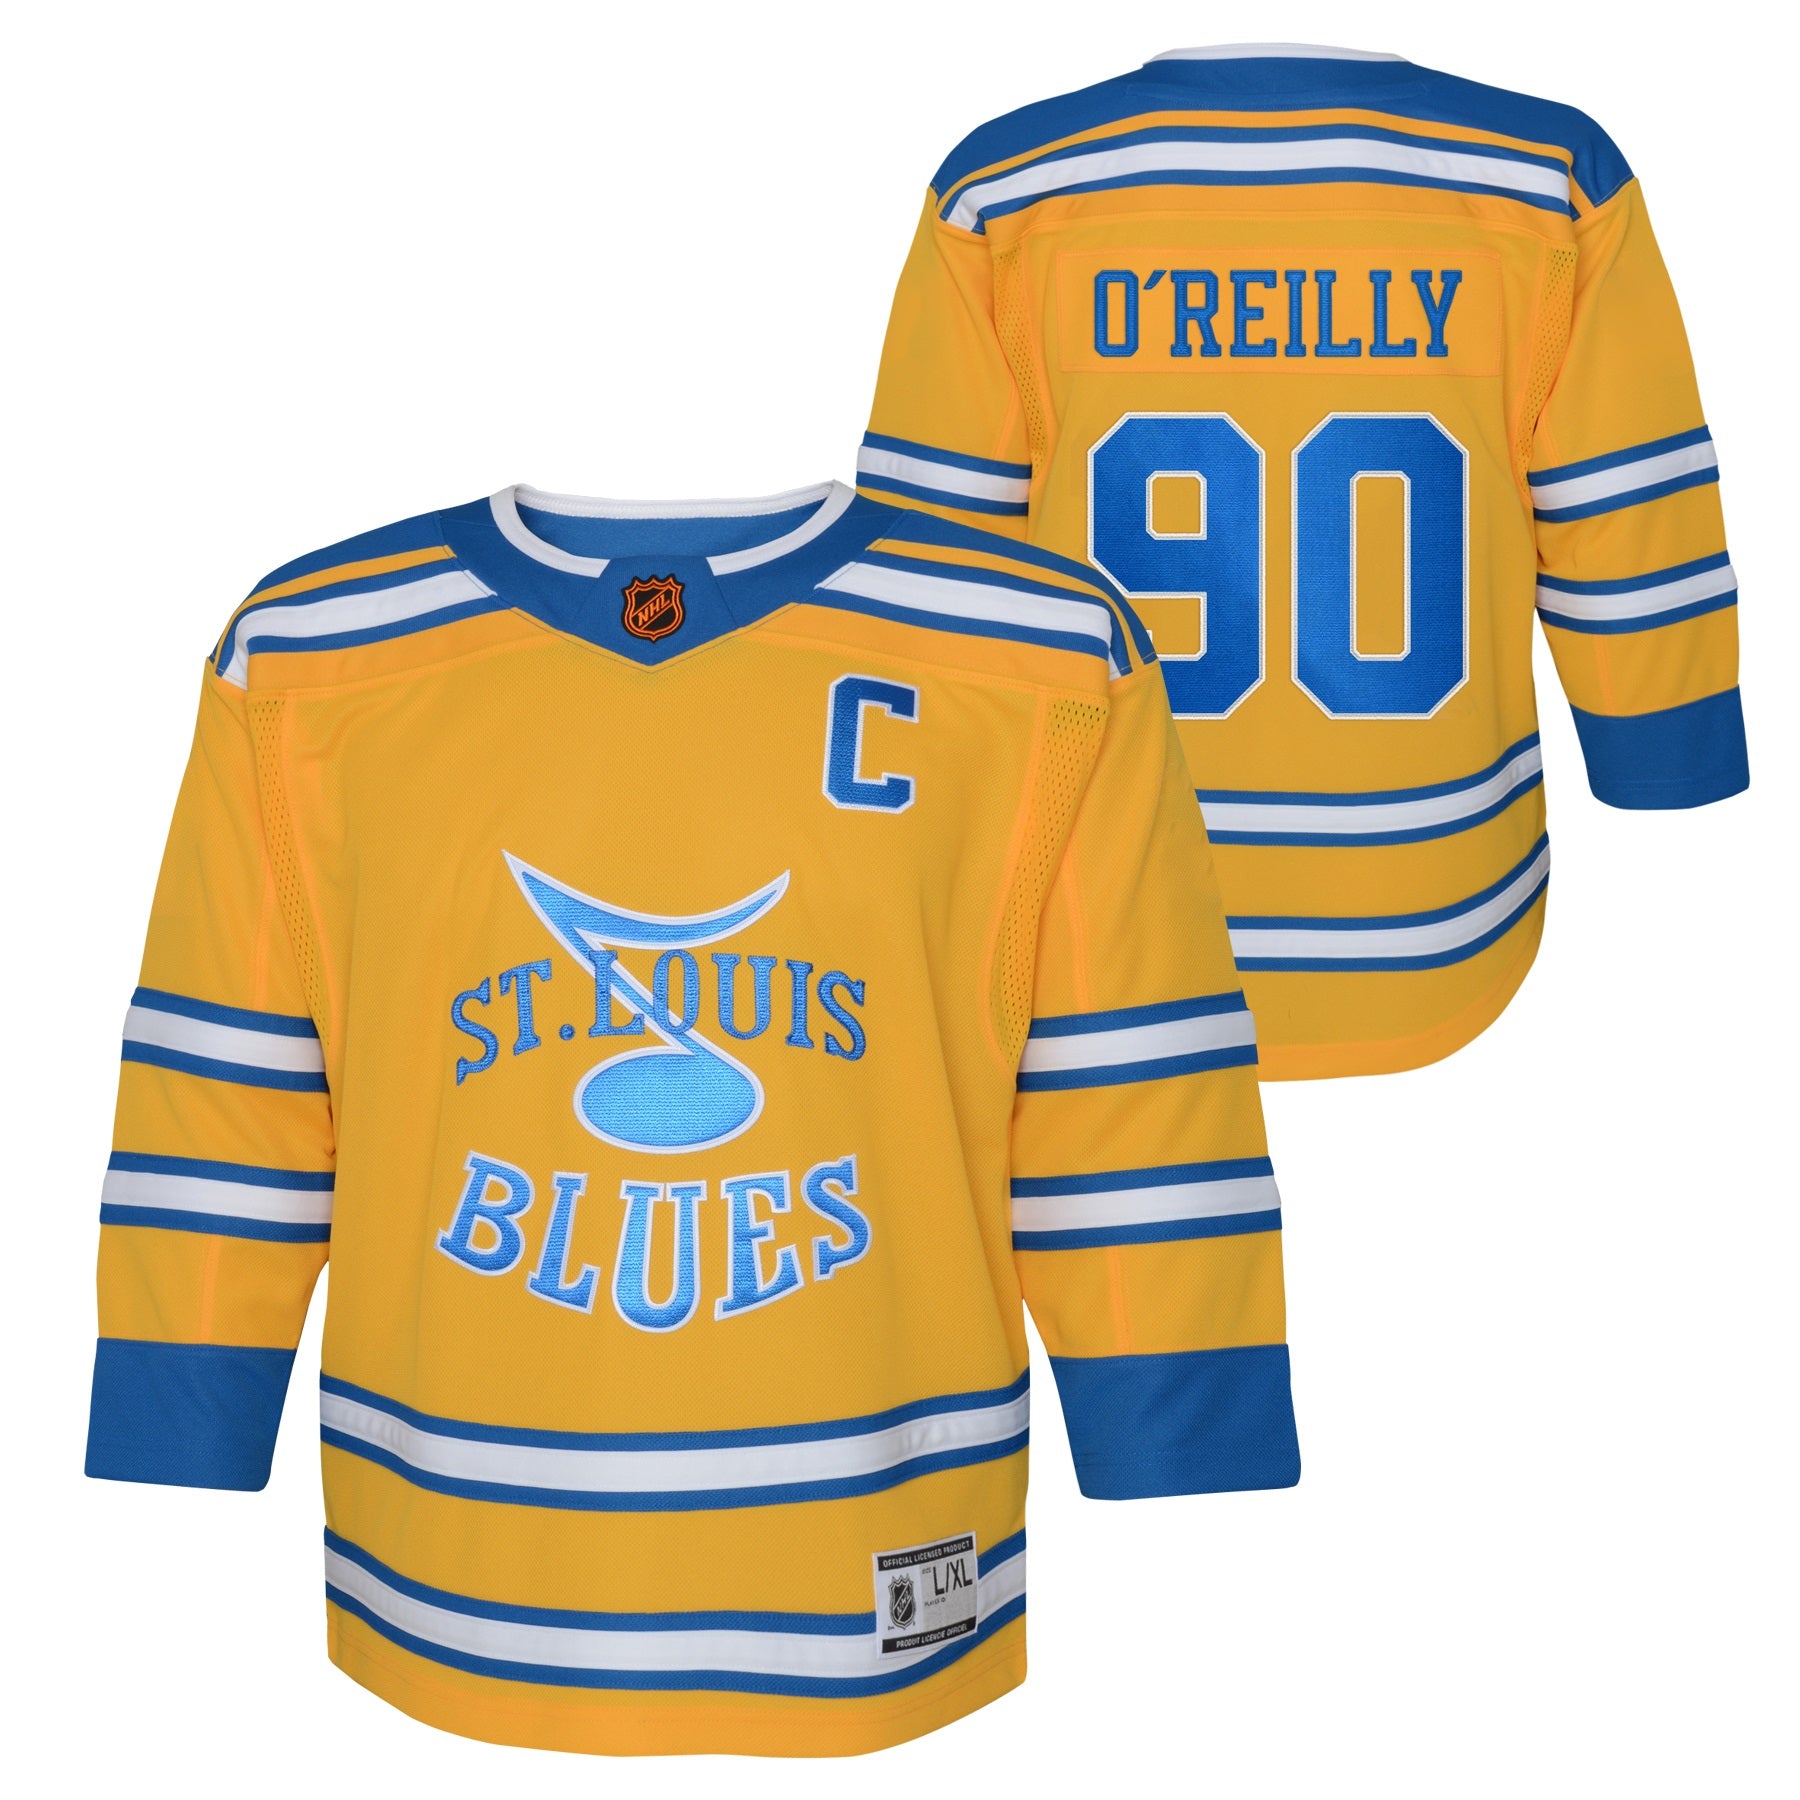 New NHL St. Louis Blues old time style jersey mid weight cotton